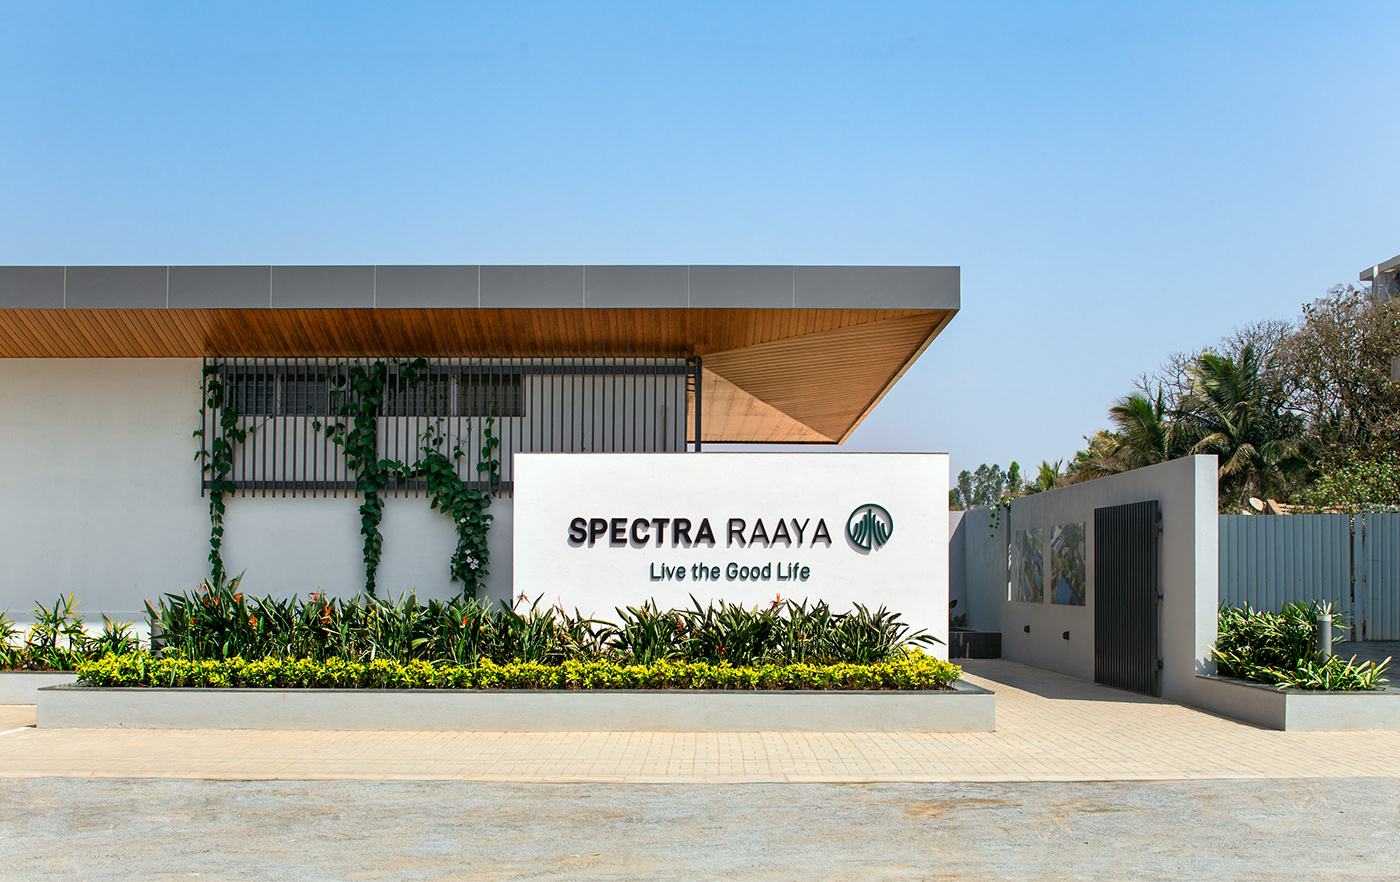 architecture design experience center Photography  real estate Spectra Constructions Spectra Raaya